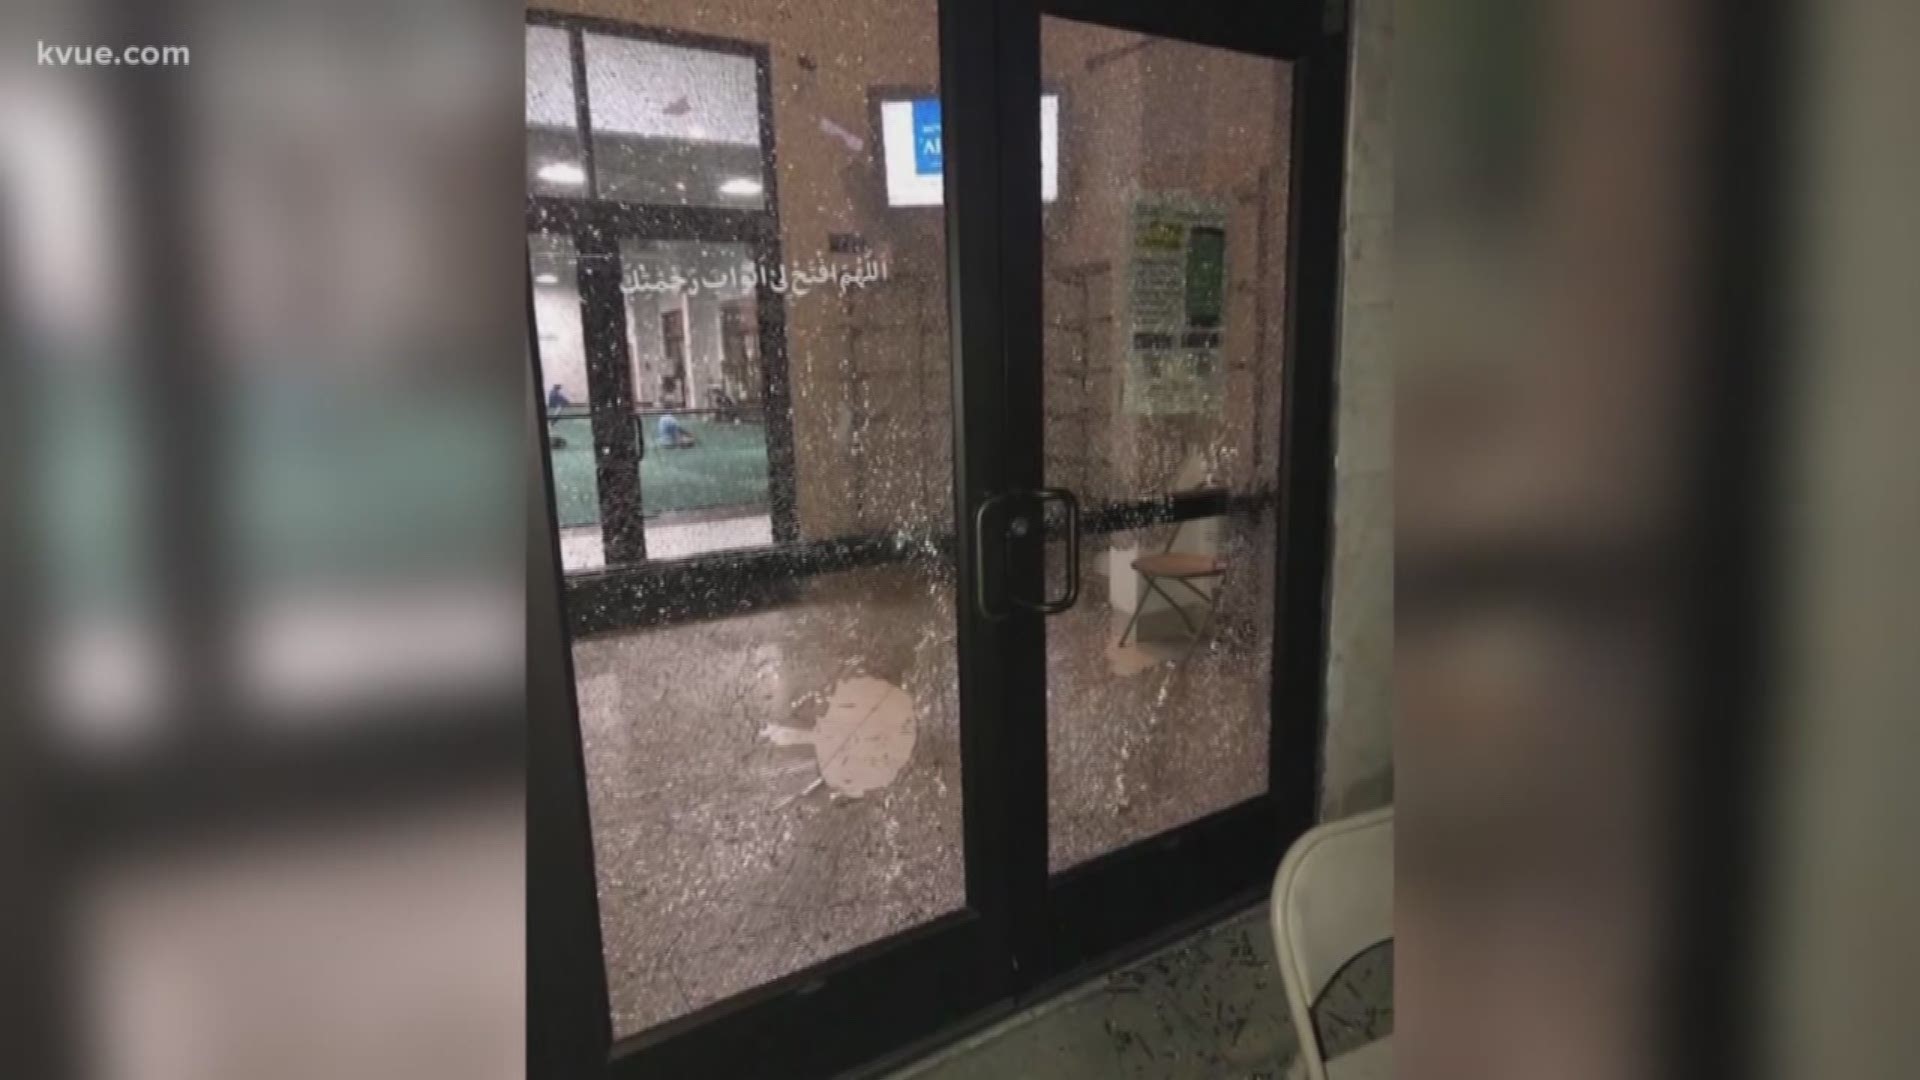 Shattered glass and broken windows at an Austin Muslim center shaking up some members of the community.